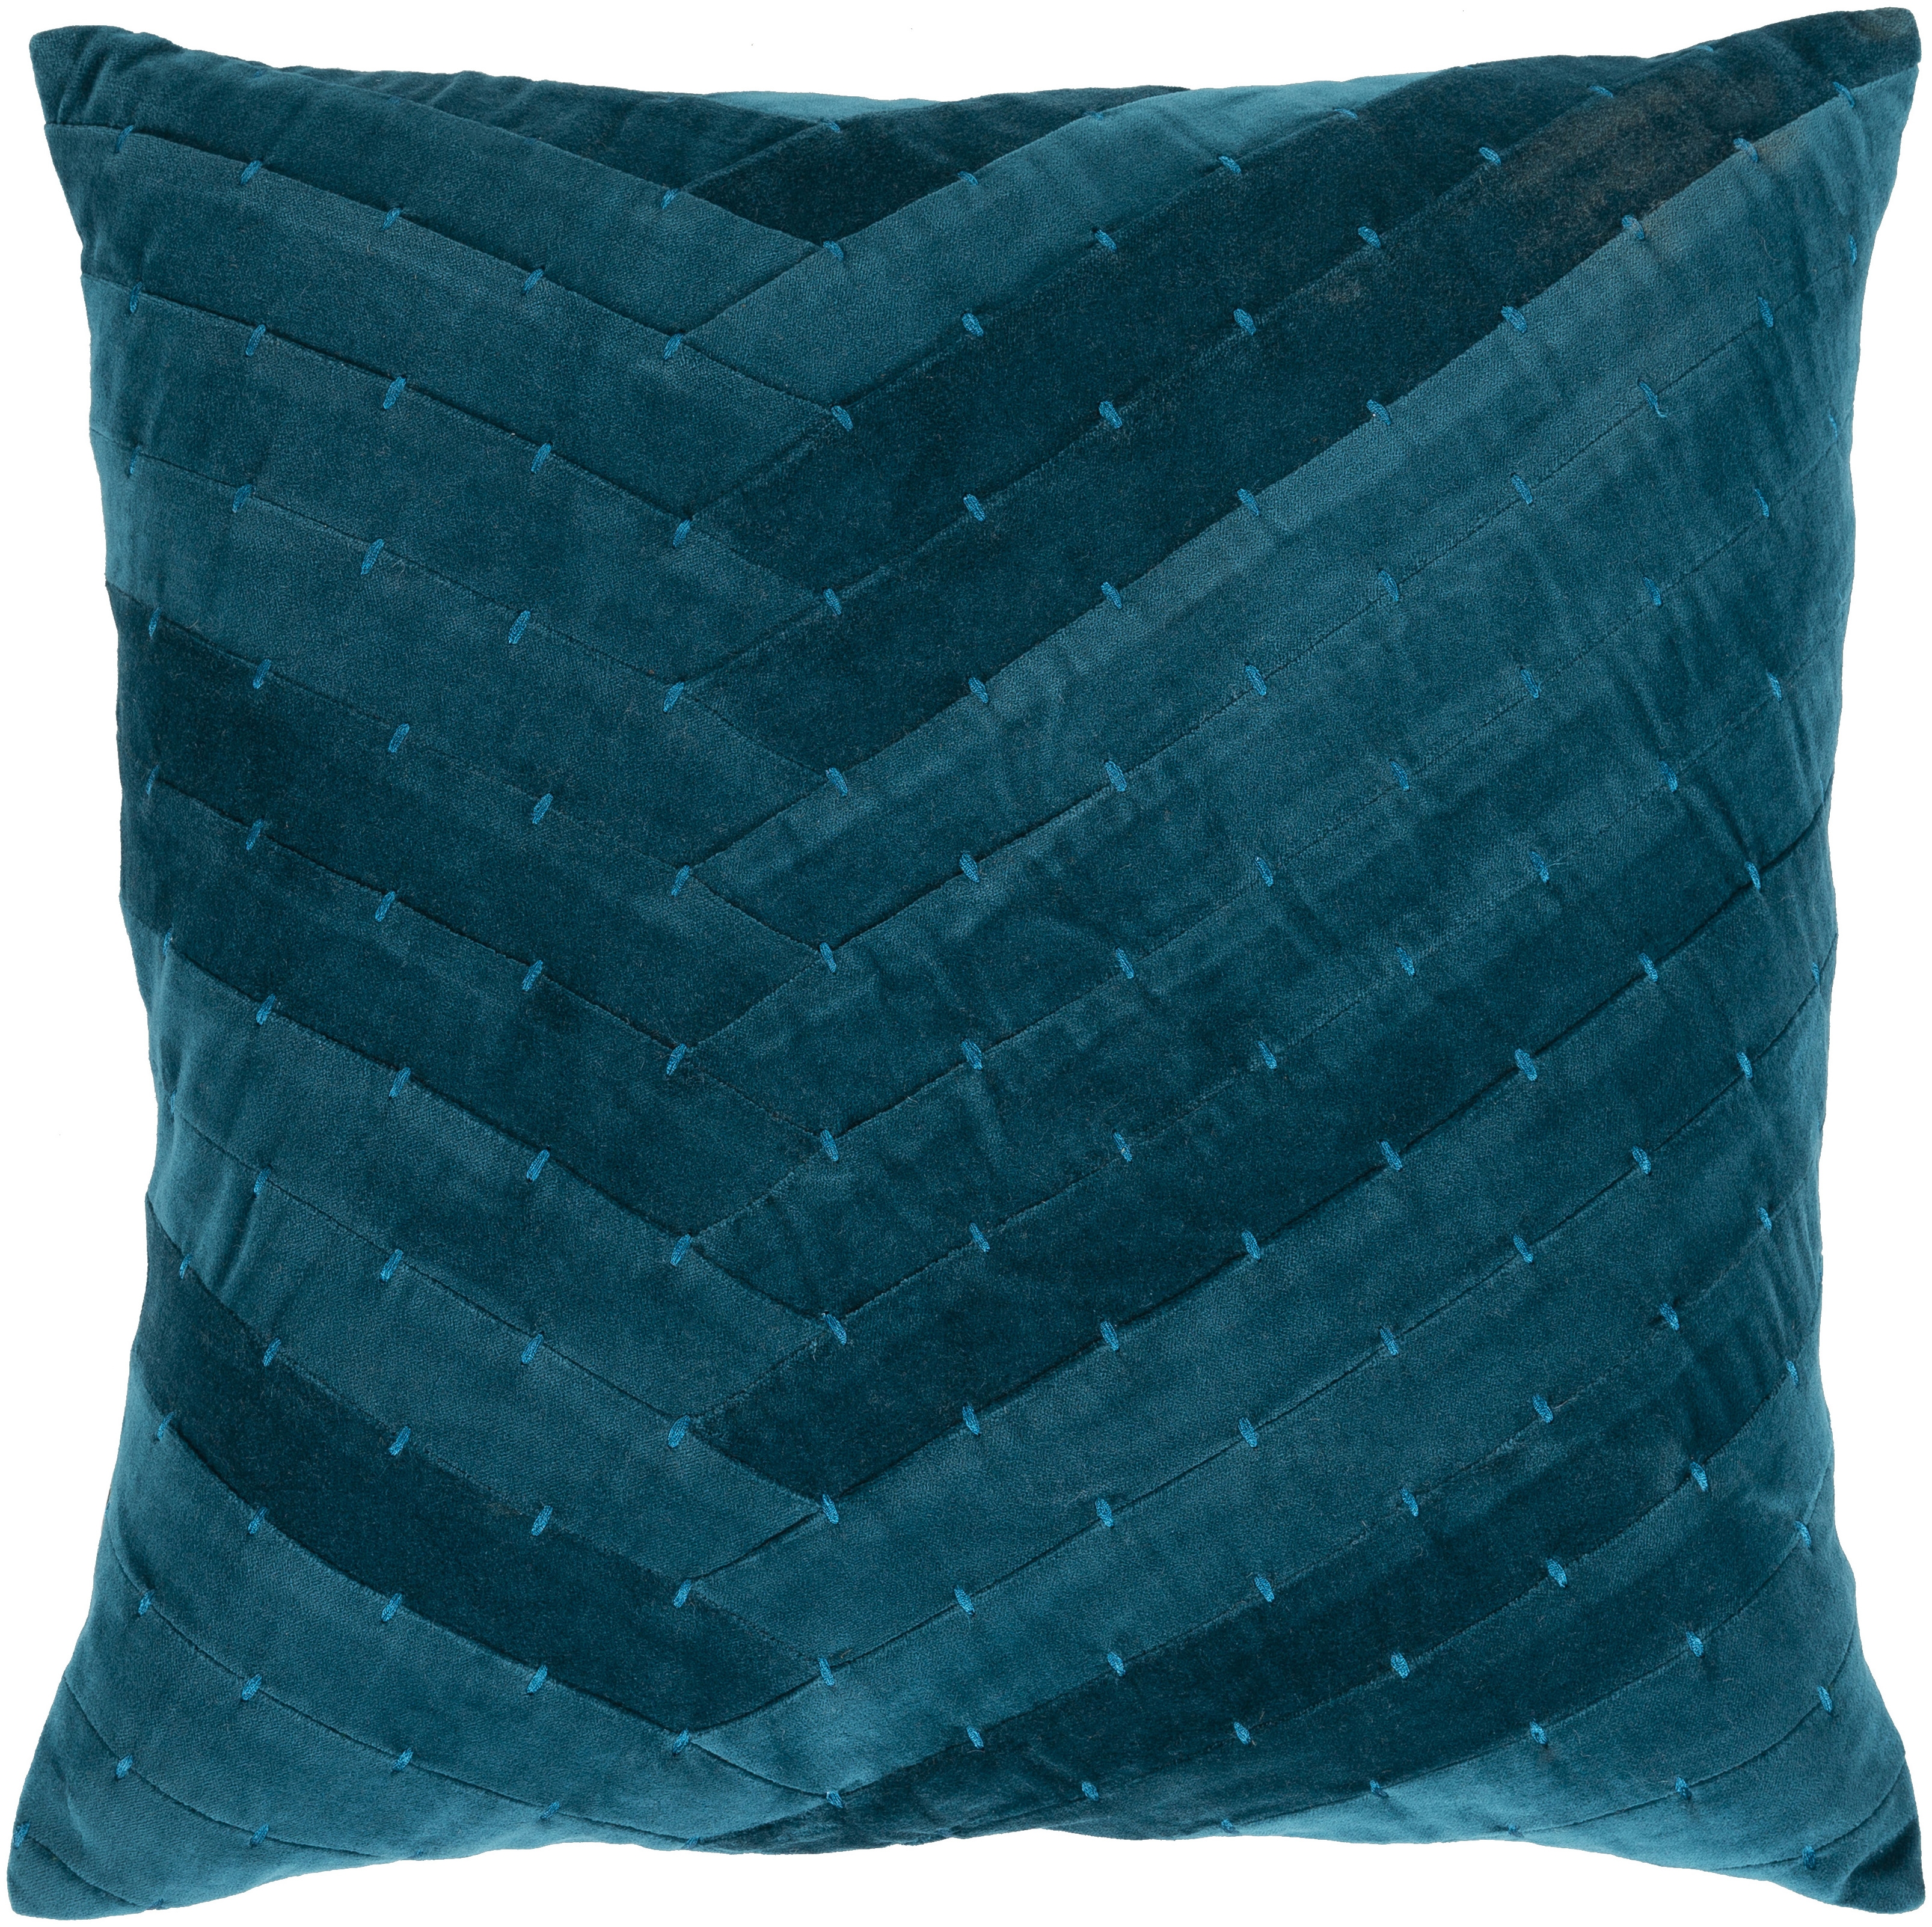 Aviana Throw Pillow, 22" x 22", with poly insert - Image 0